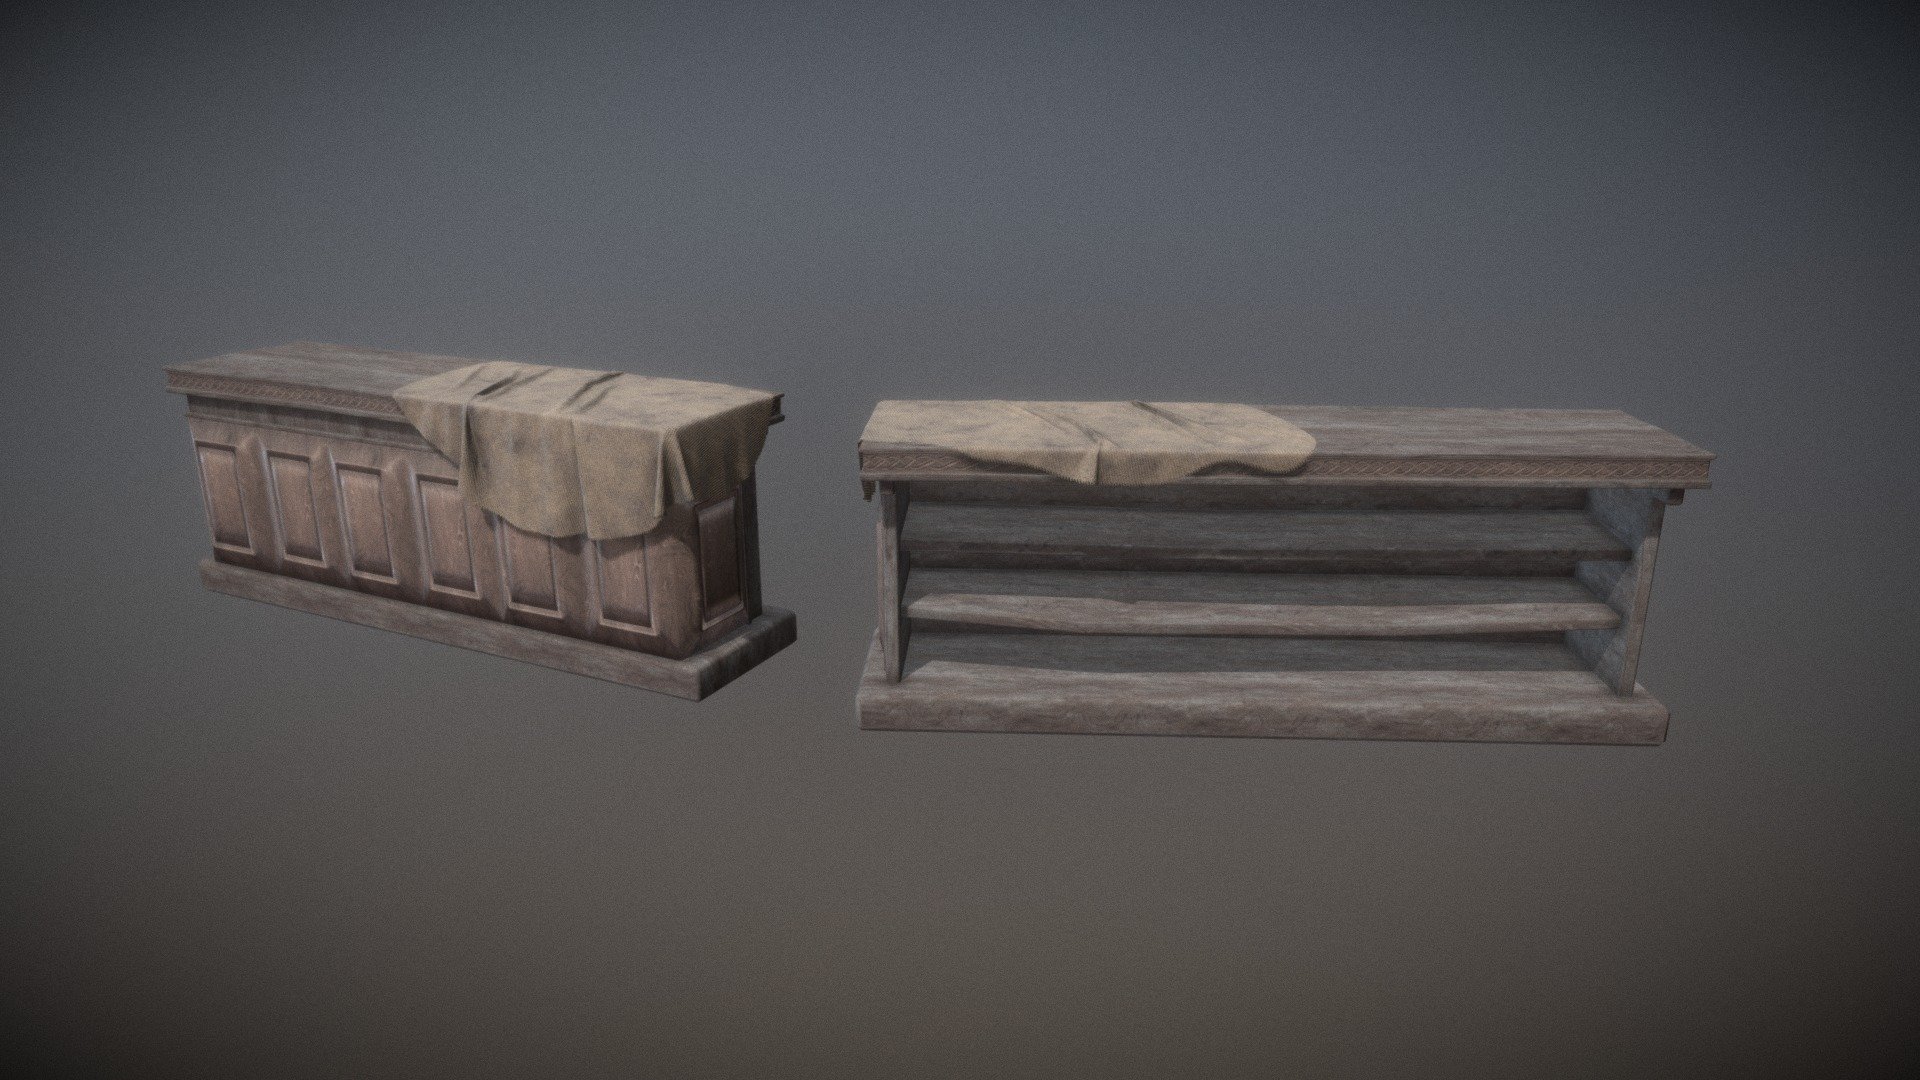 An big old tavern desk. Plus a cloth draping over.

LODs done by hand @50% increments.

Part of the “Old Tavern” set - https://goo.gl/KuknSf Part of the “Old” series - https://goo.gl/XWypwo - Old tavern Desk + Cloth - Buy Royalty Free 3D model by inedible.red (@inediblered) 3d model